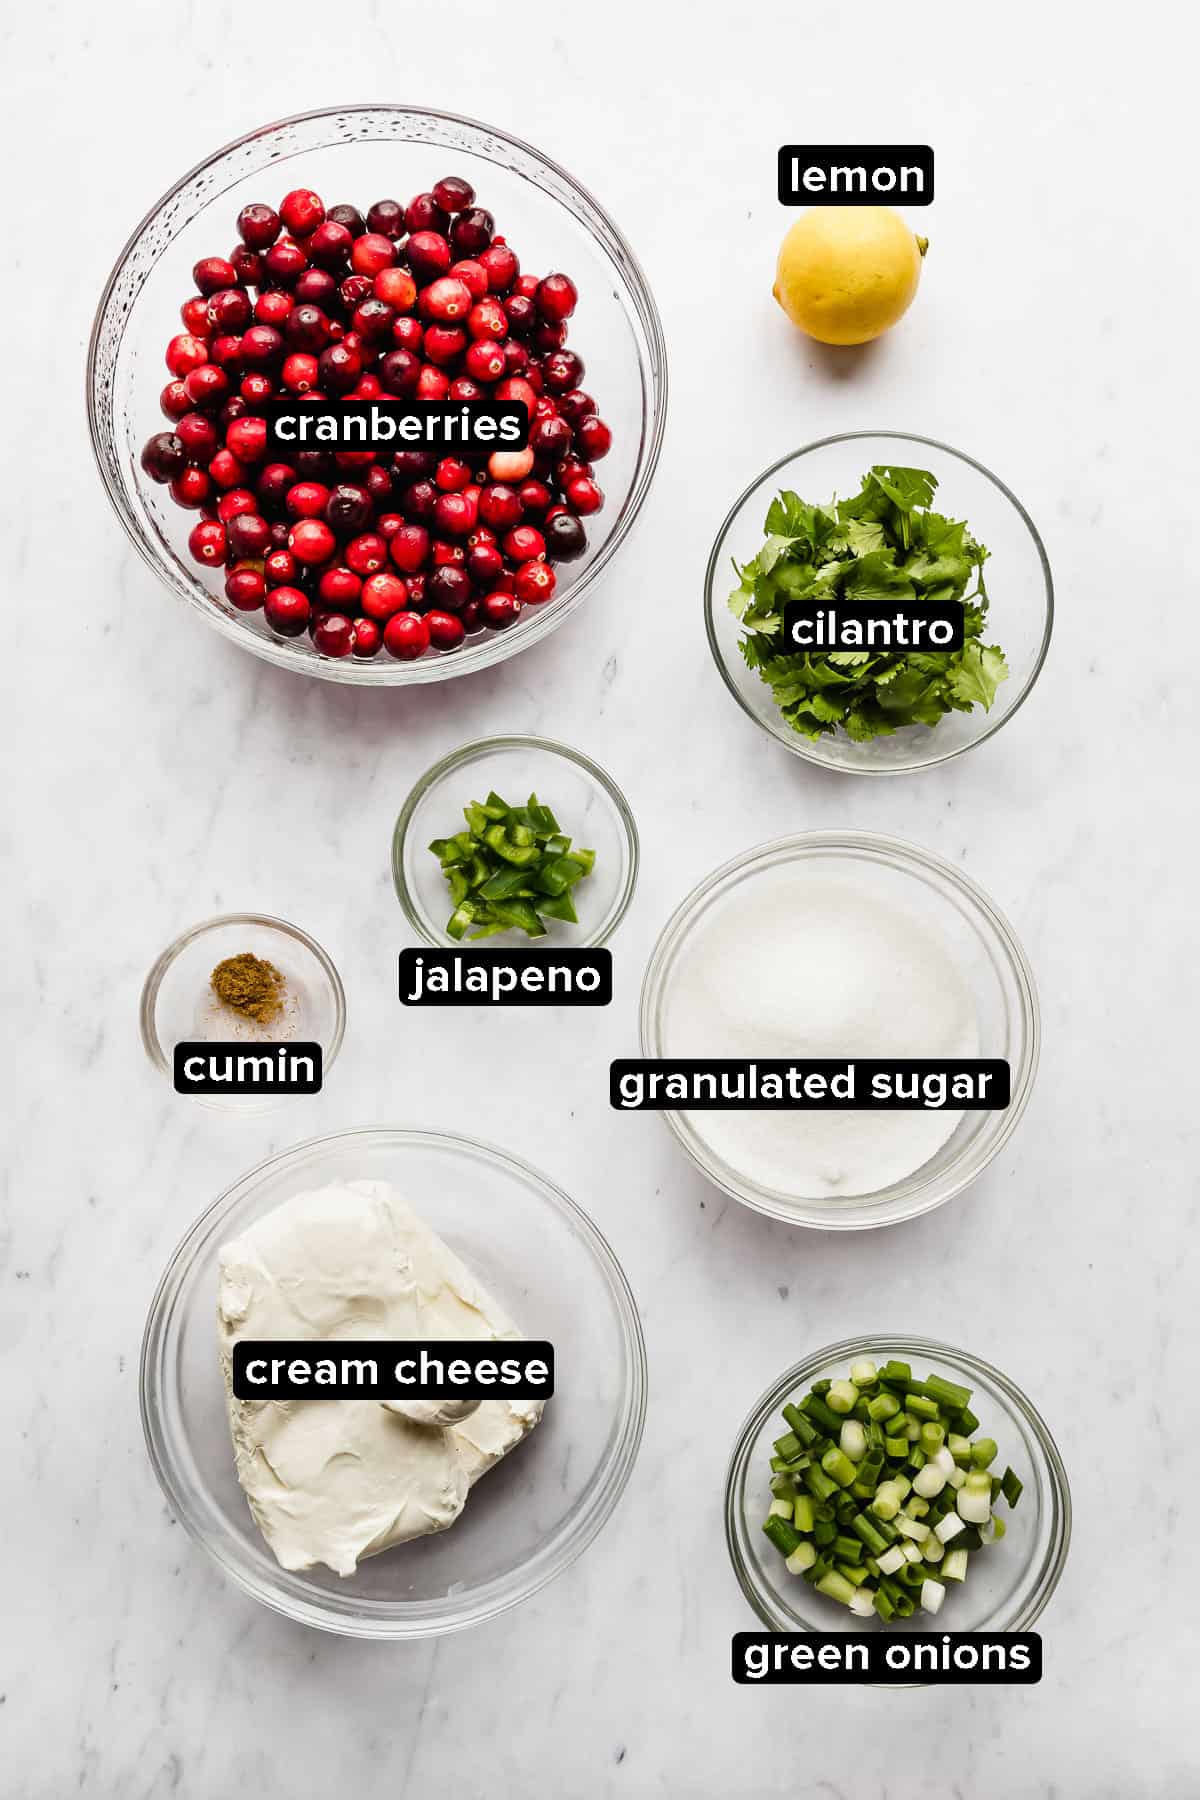 Cranberry cilantro dip ingredients in glass bowls on a white background.